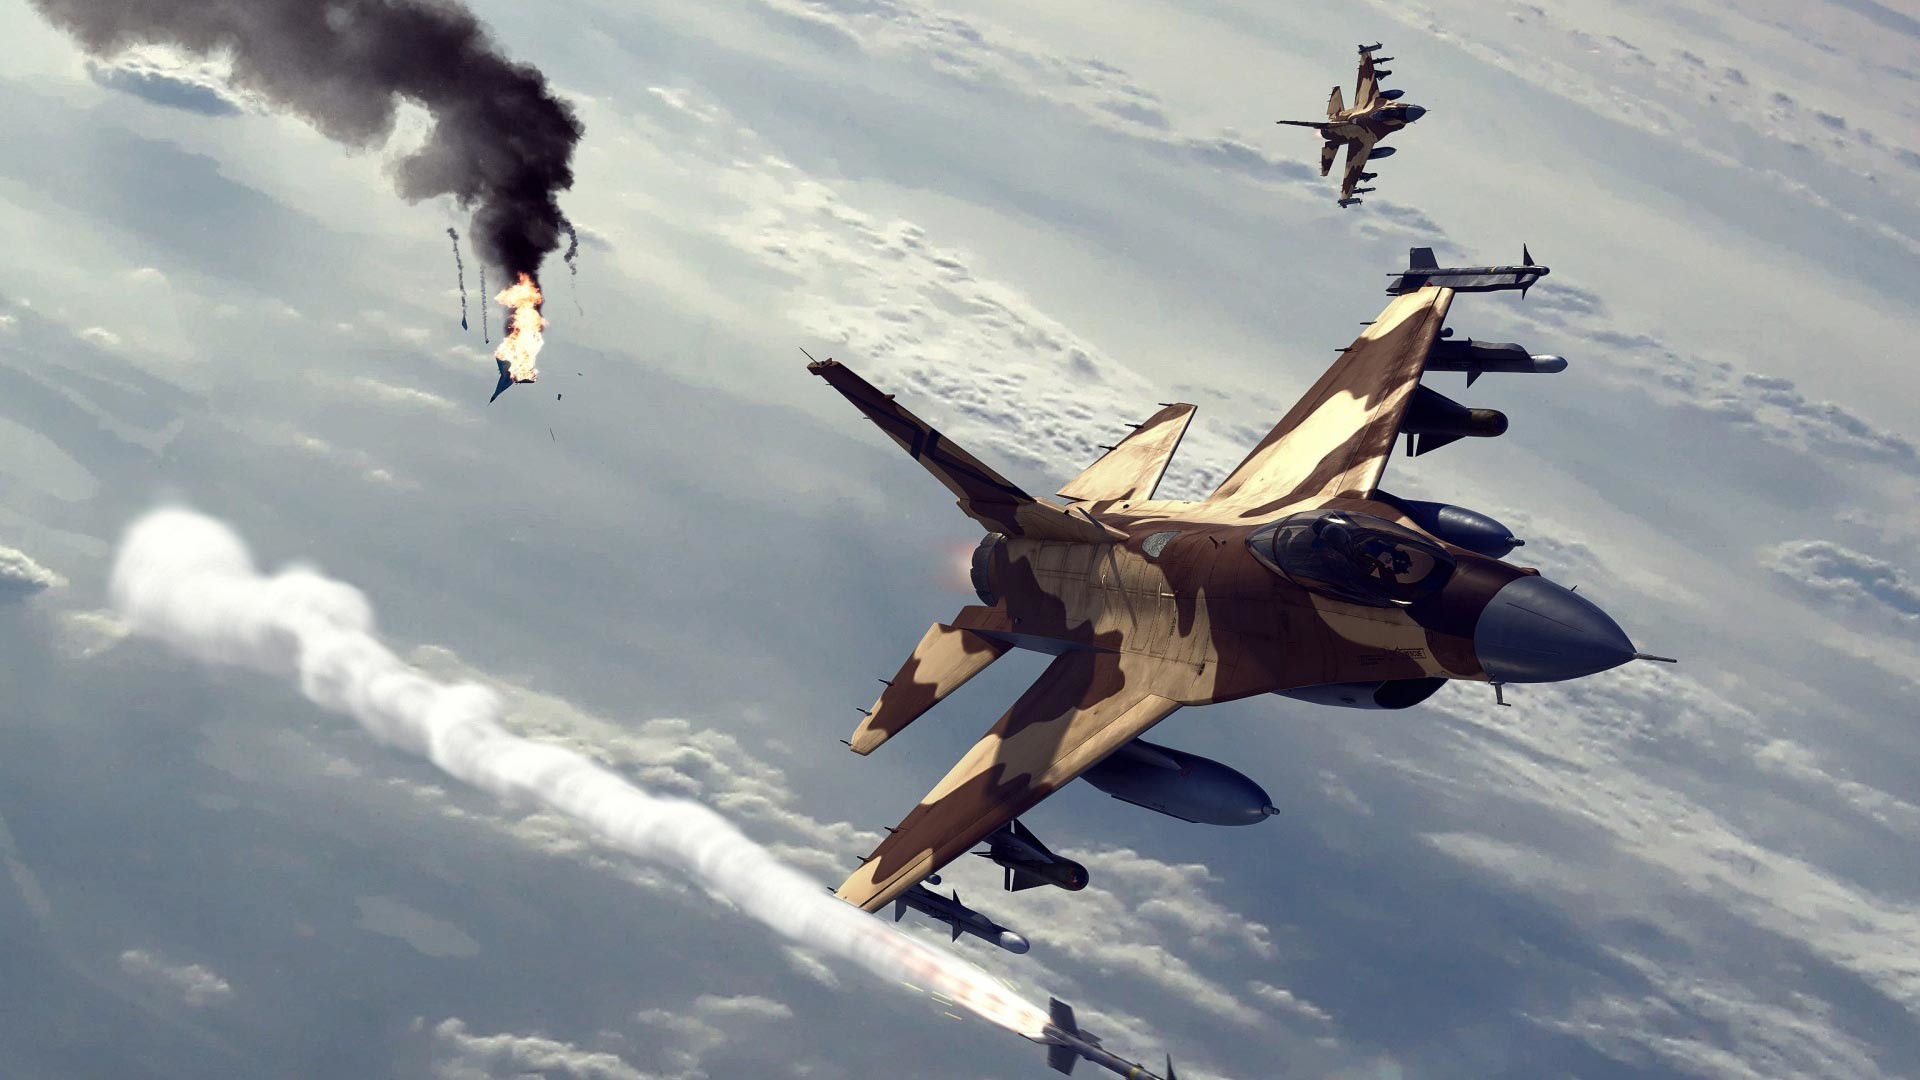 1920x1080 Fighter Jets Theme for Windows 10 8 7